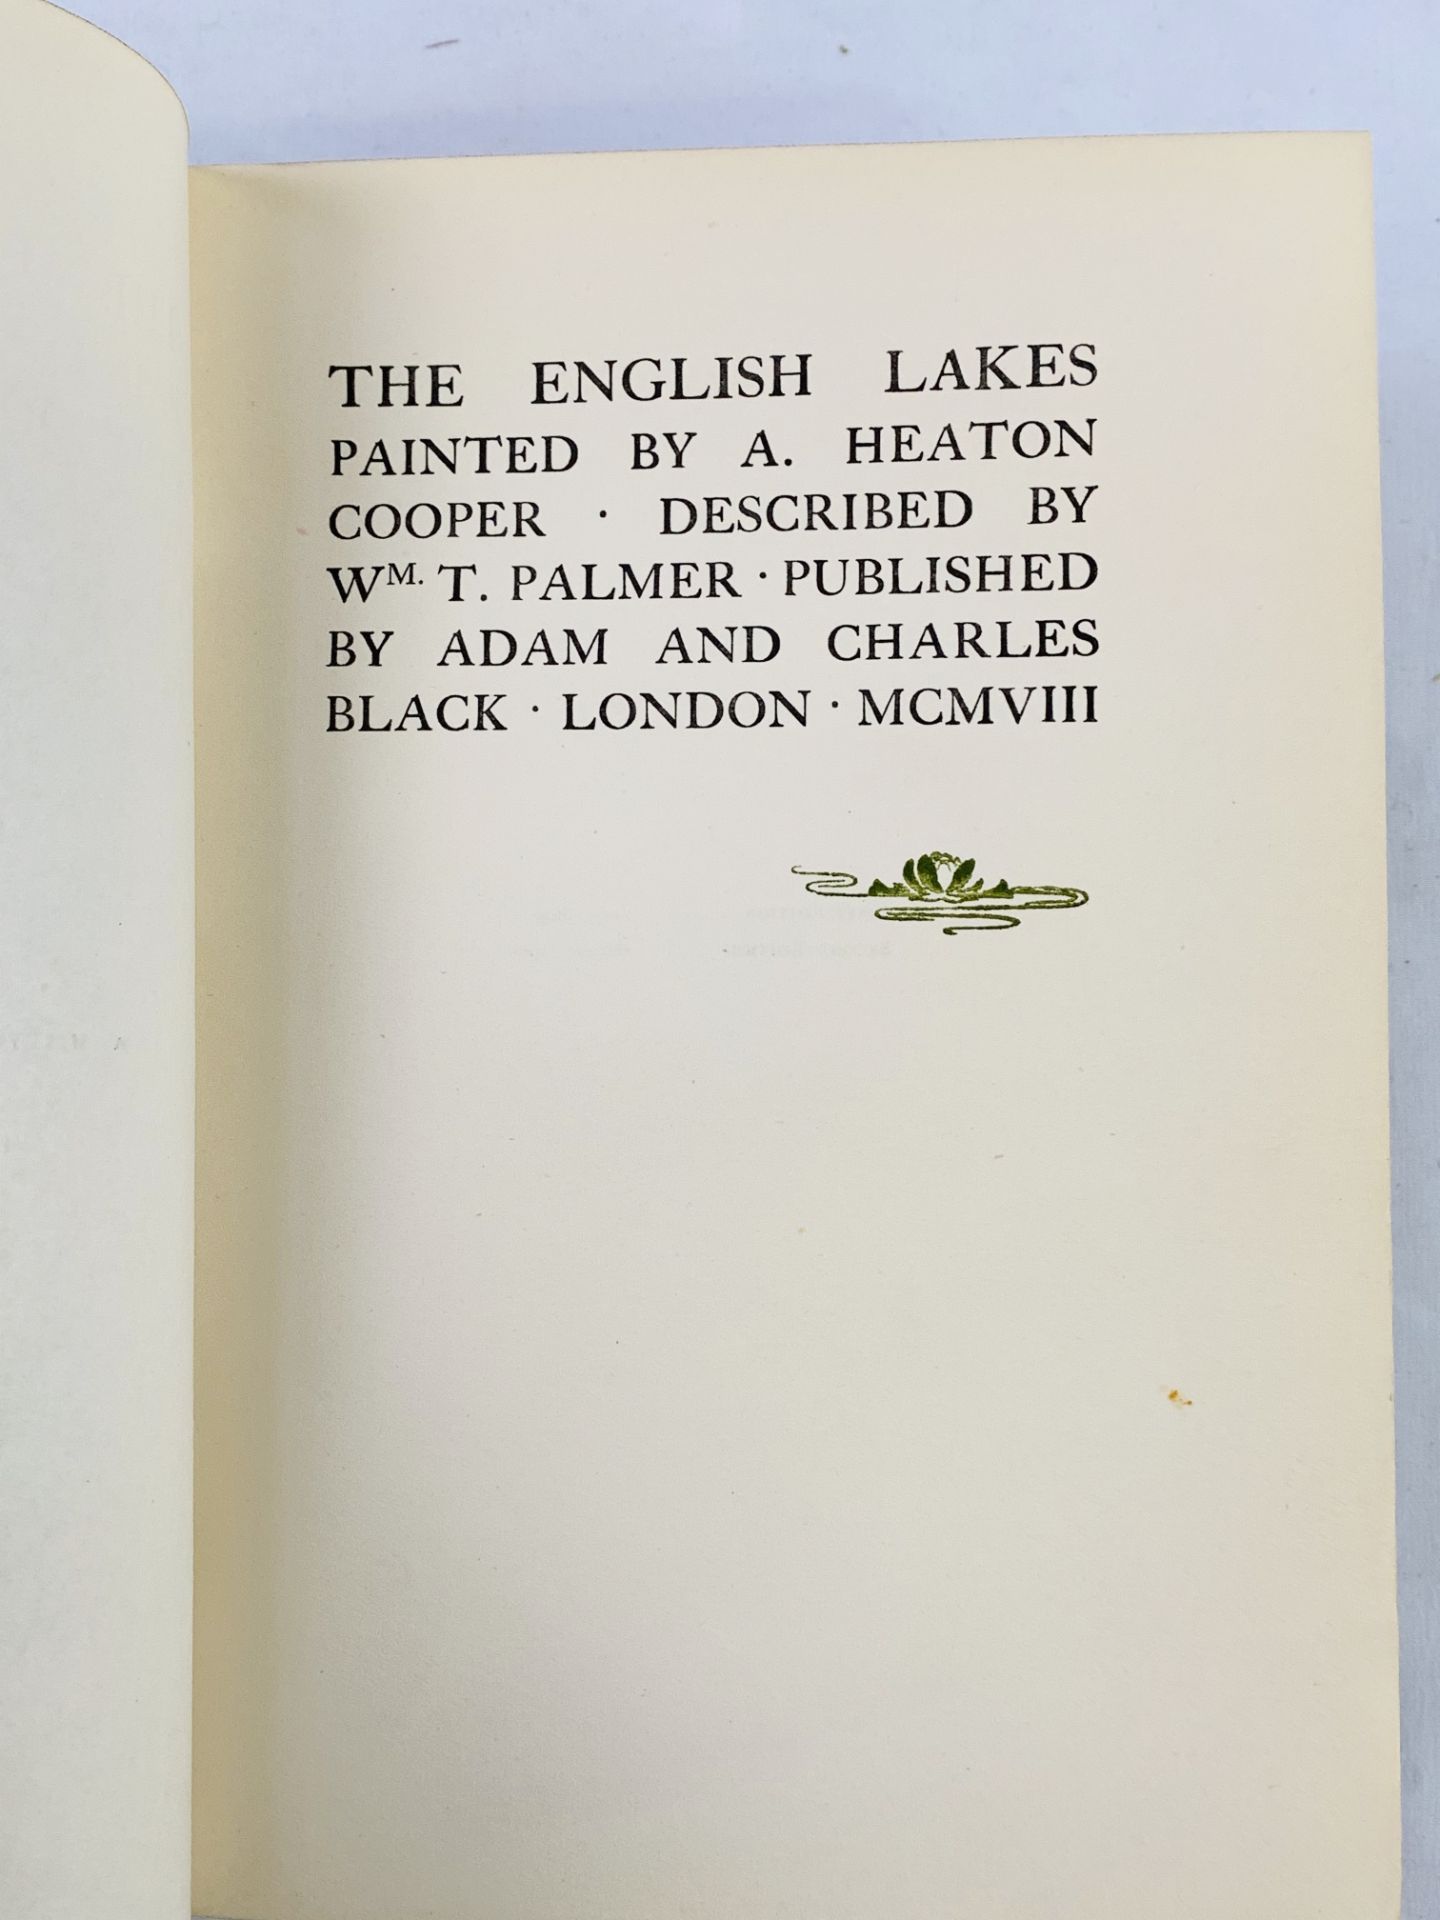 The English Lakes Painted by A. Heaton Cooper, William Palmer, 1908, 2nd edition. - Image 3 of 3